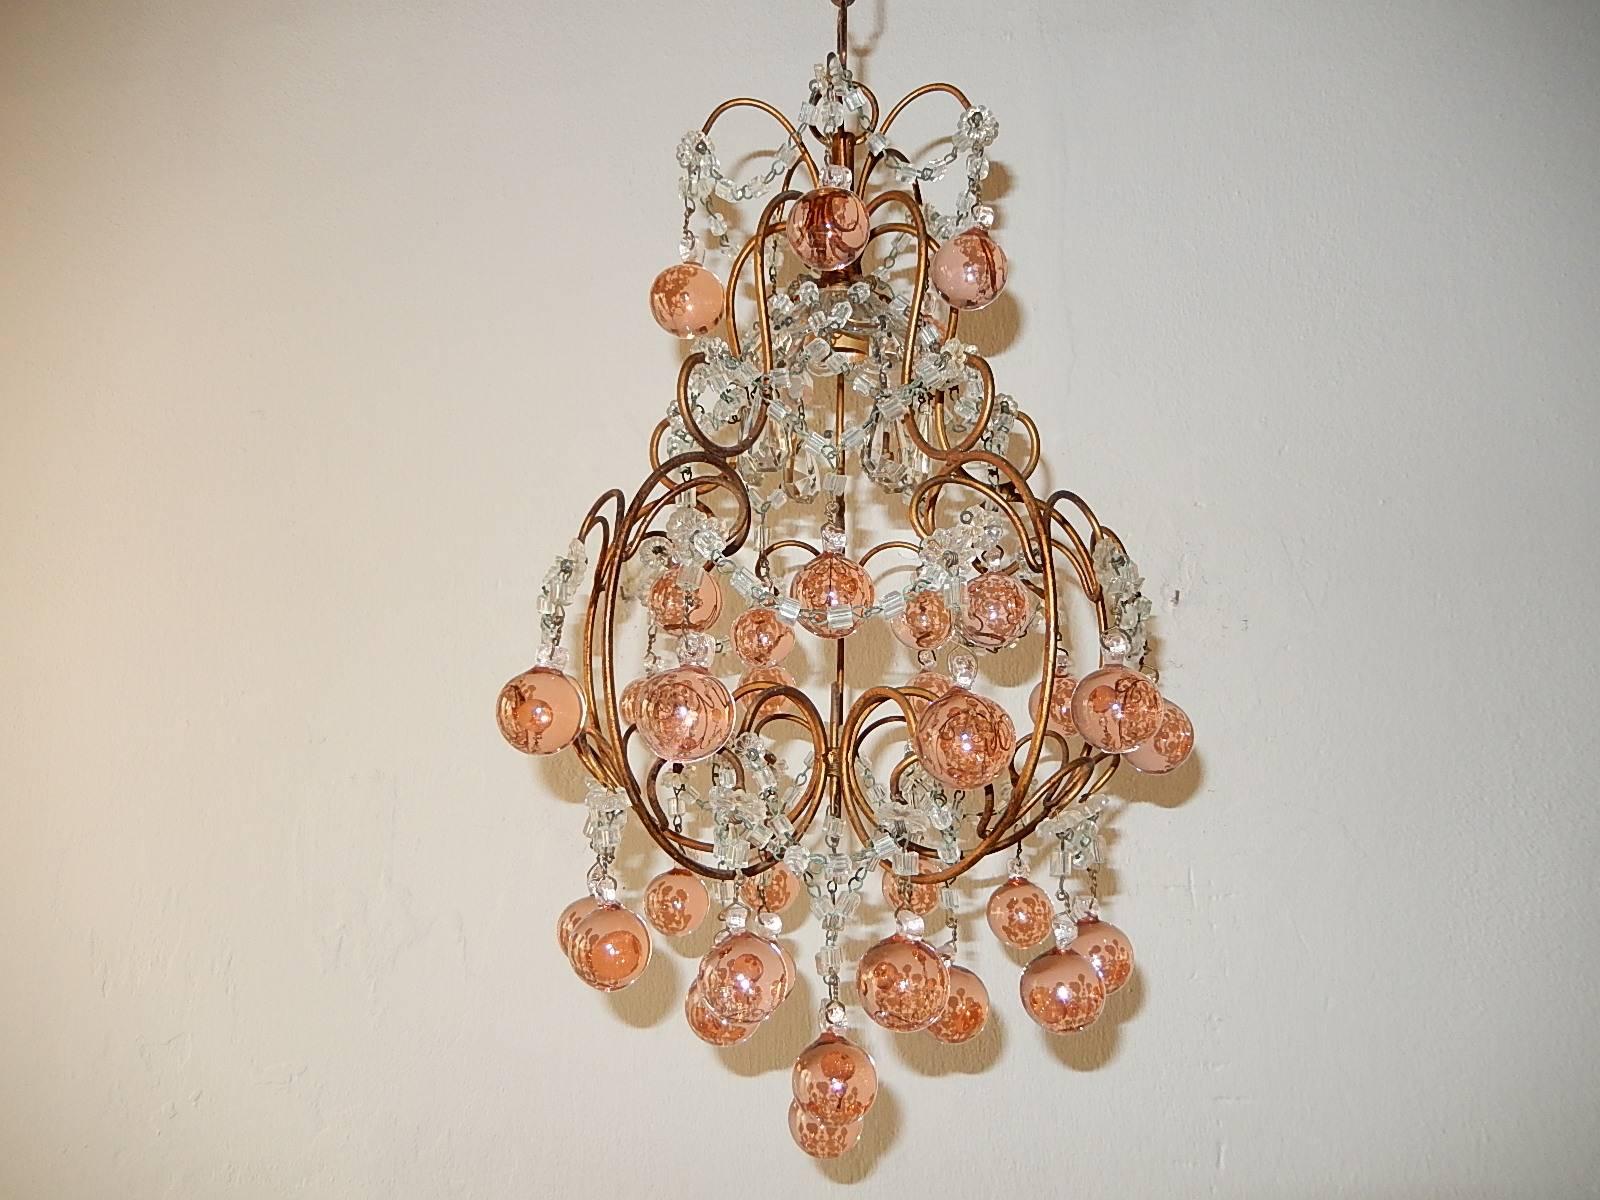 Housing one light under a crystal bobeches, dripping with vintage crystal prisms. Re-wired and ready to hang! Gilt metal with glass florets and macaroni beading swags throughout. Adorning rare pink Murano Bulbous balls. Adding 10 inches of original